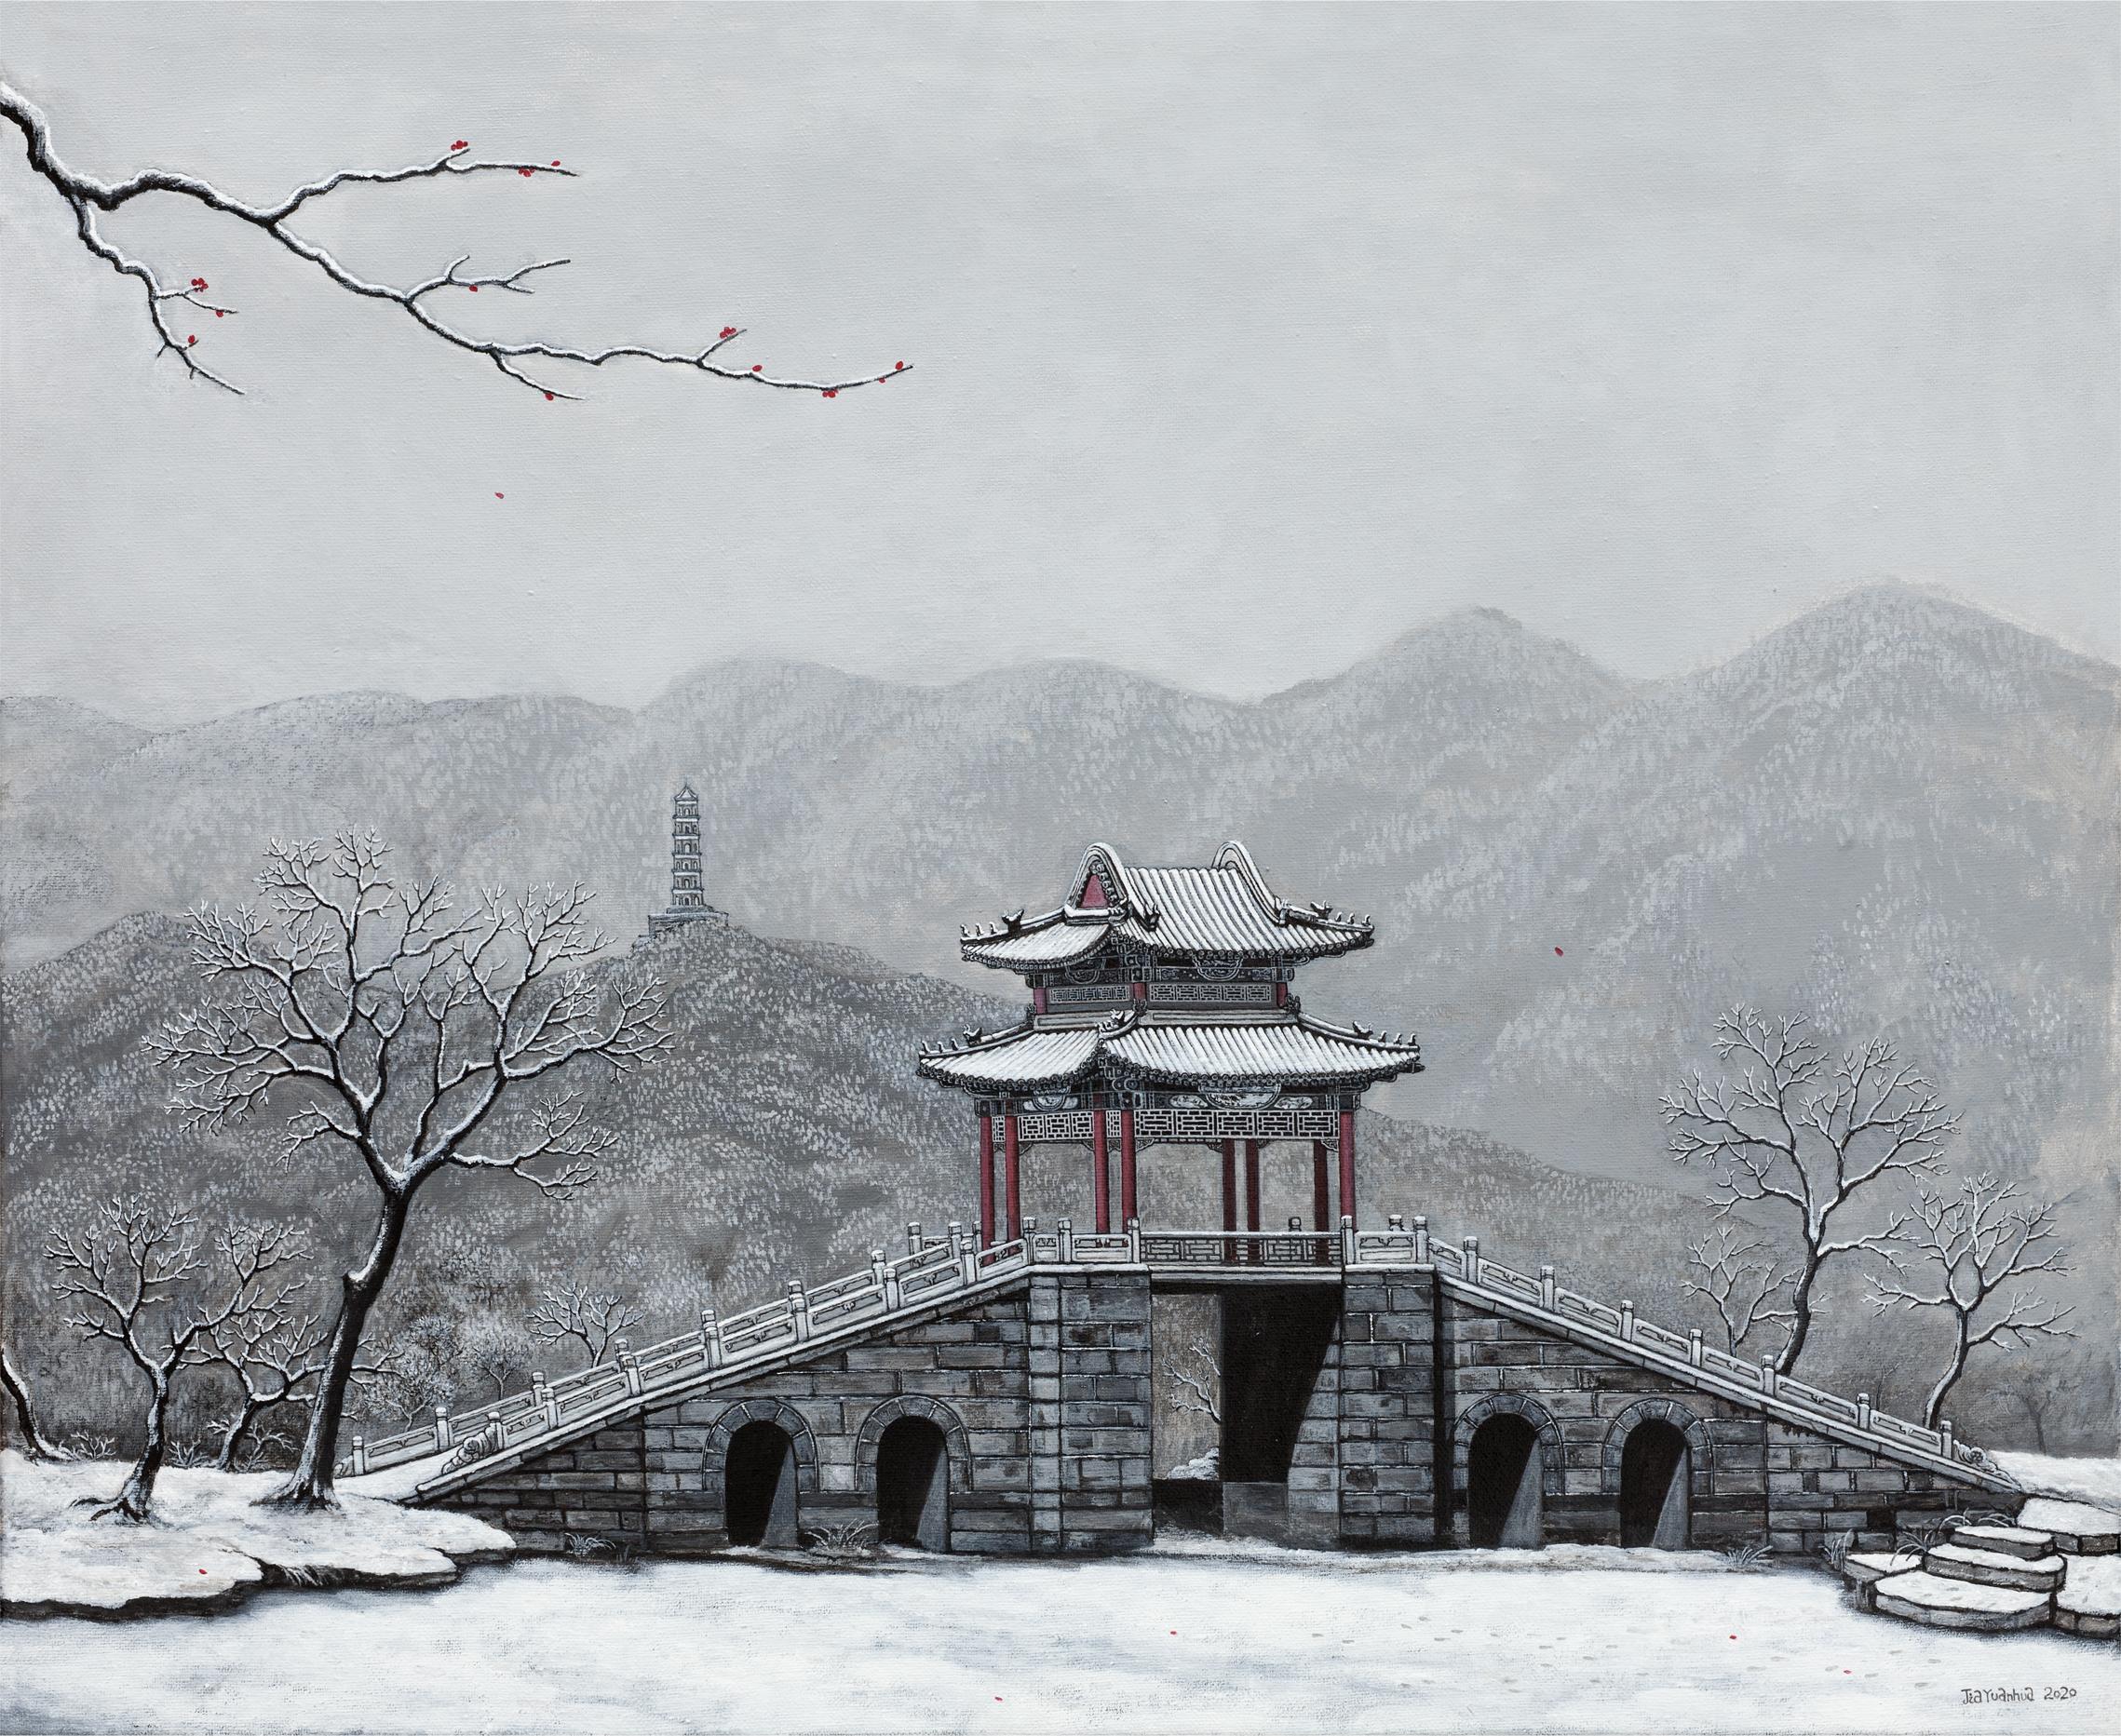 Chinese Contemporary Art by Jia Yuan-Hua - Bright Snow On The West Mountain